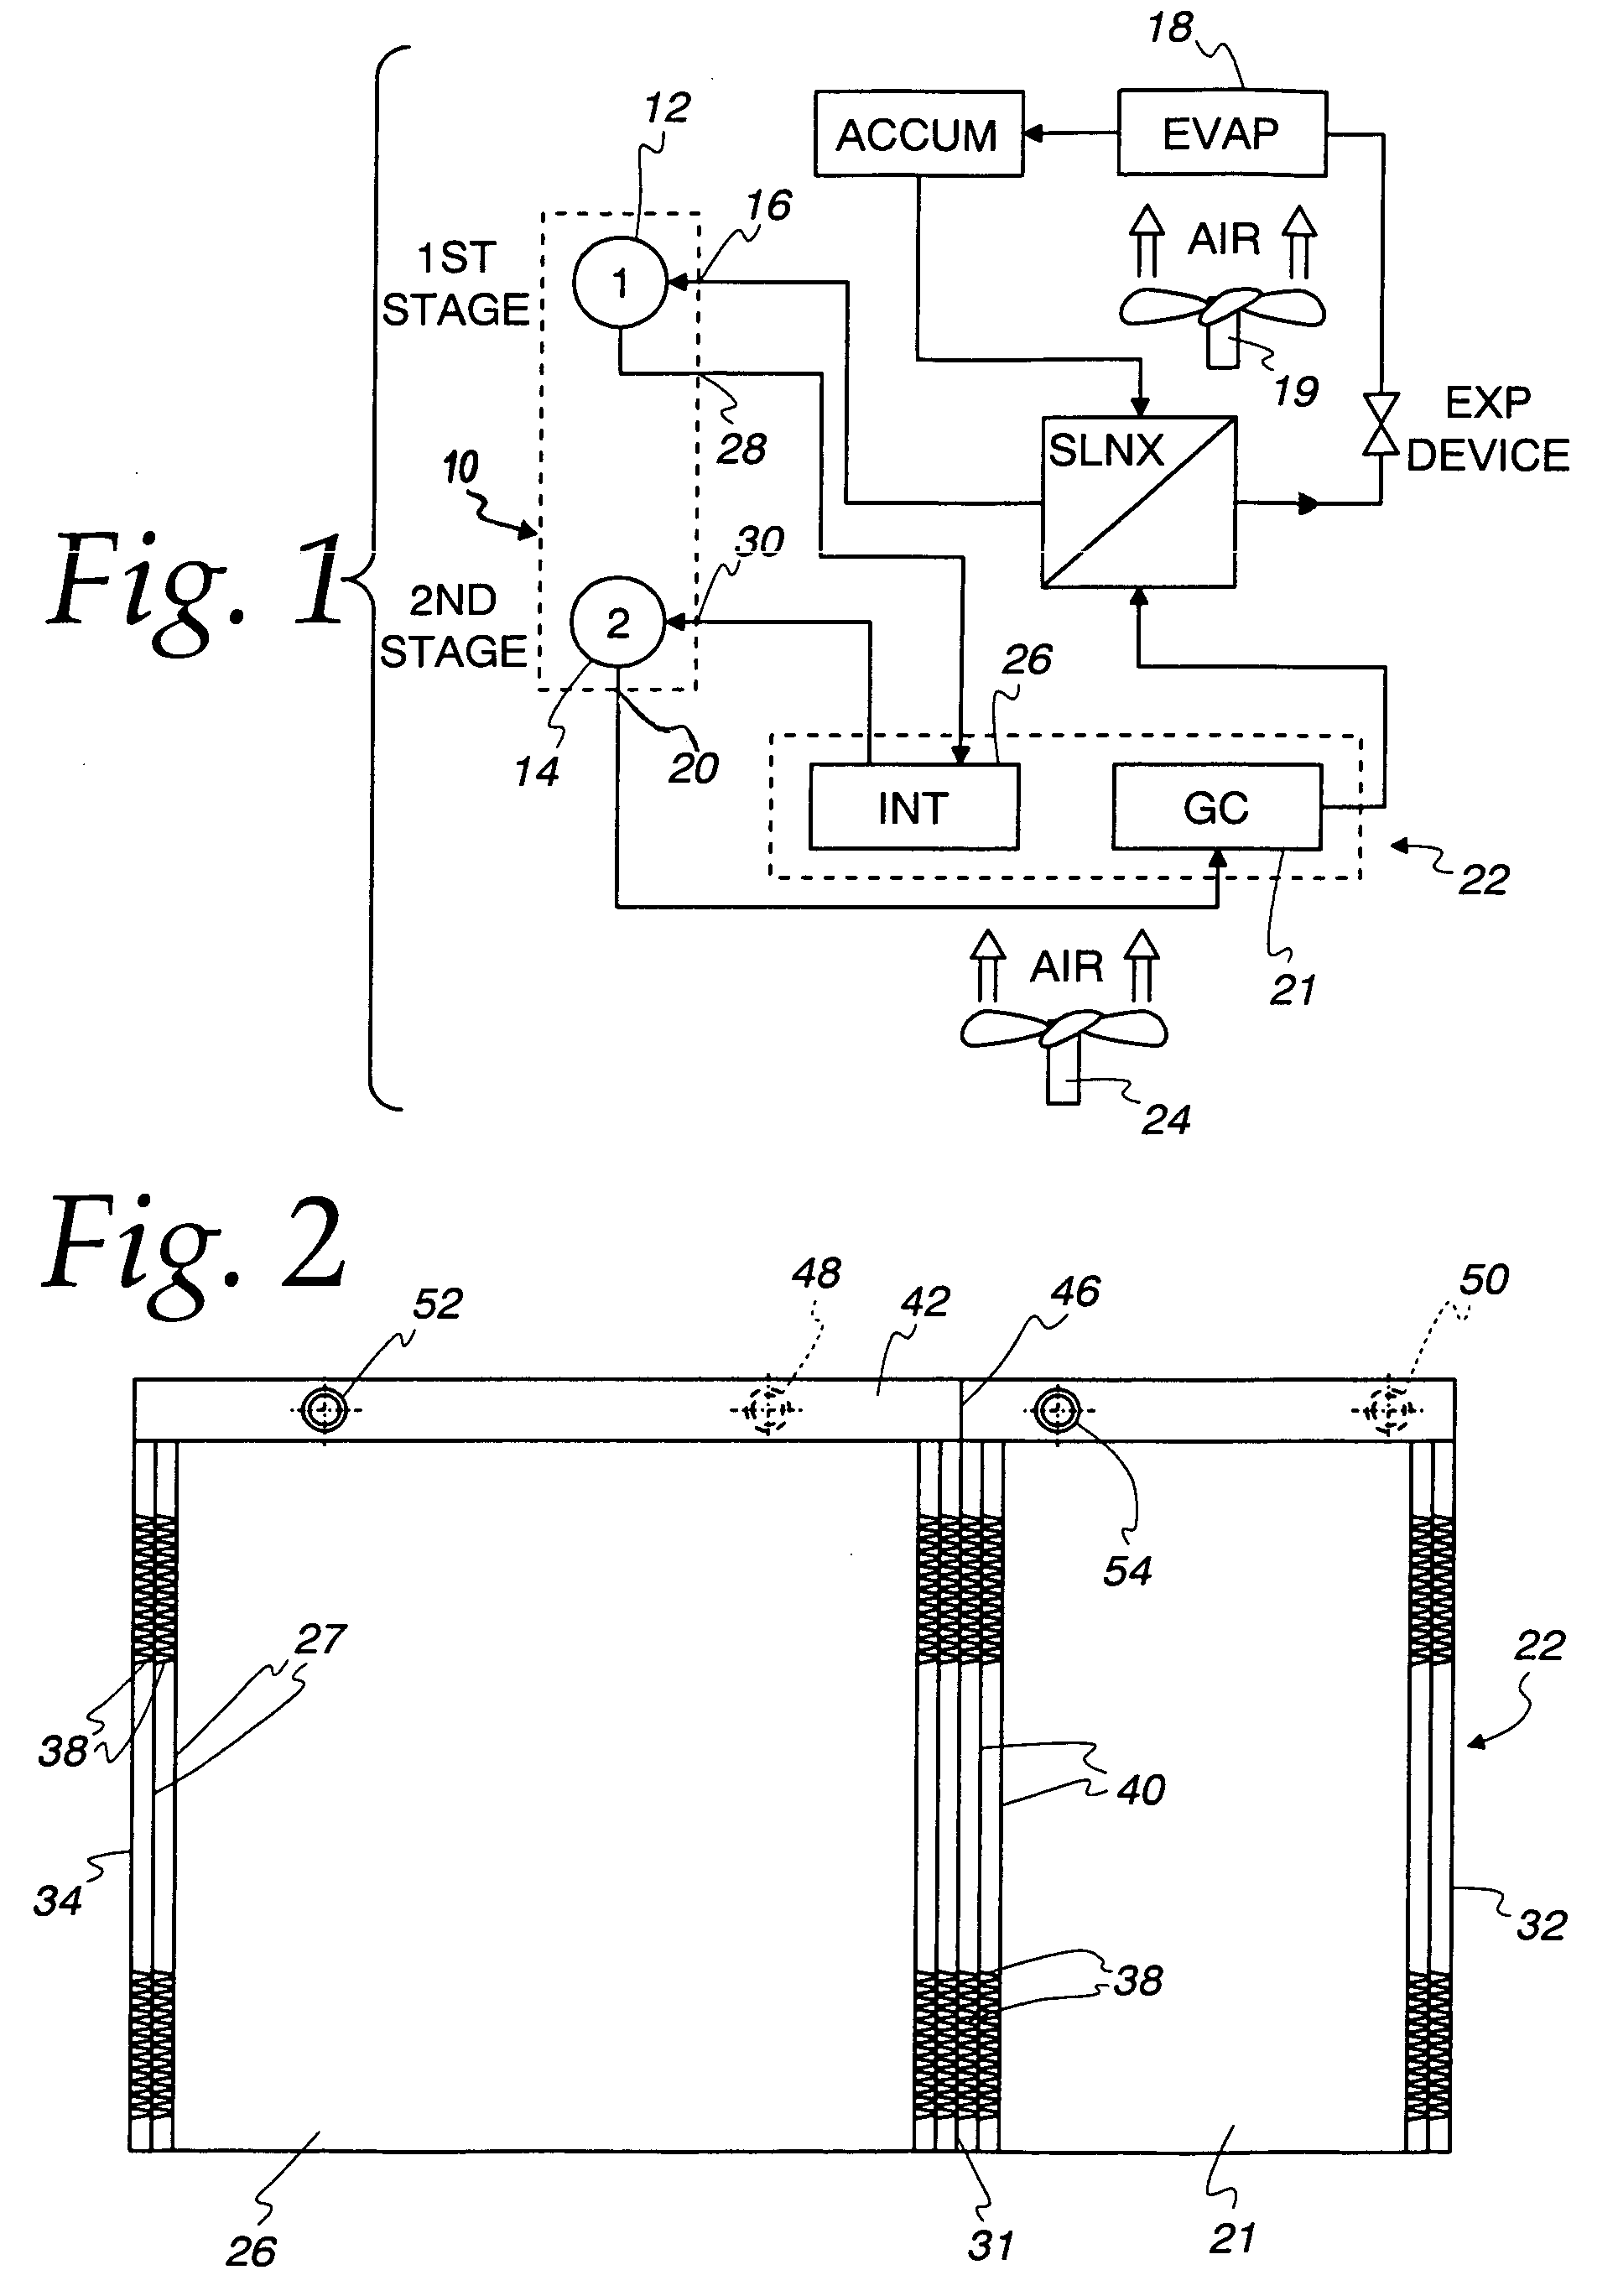 Integrated heat exchanger for use in a refrigeration system